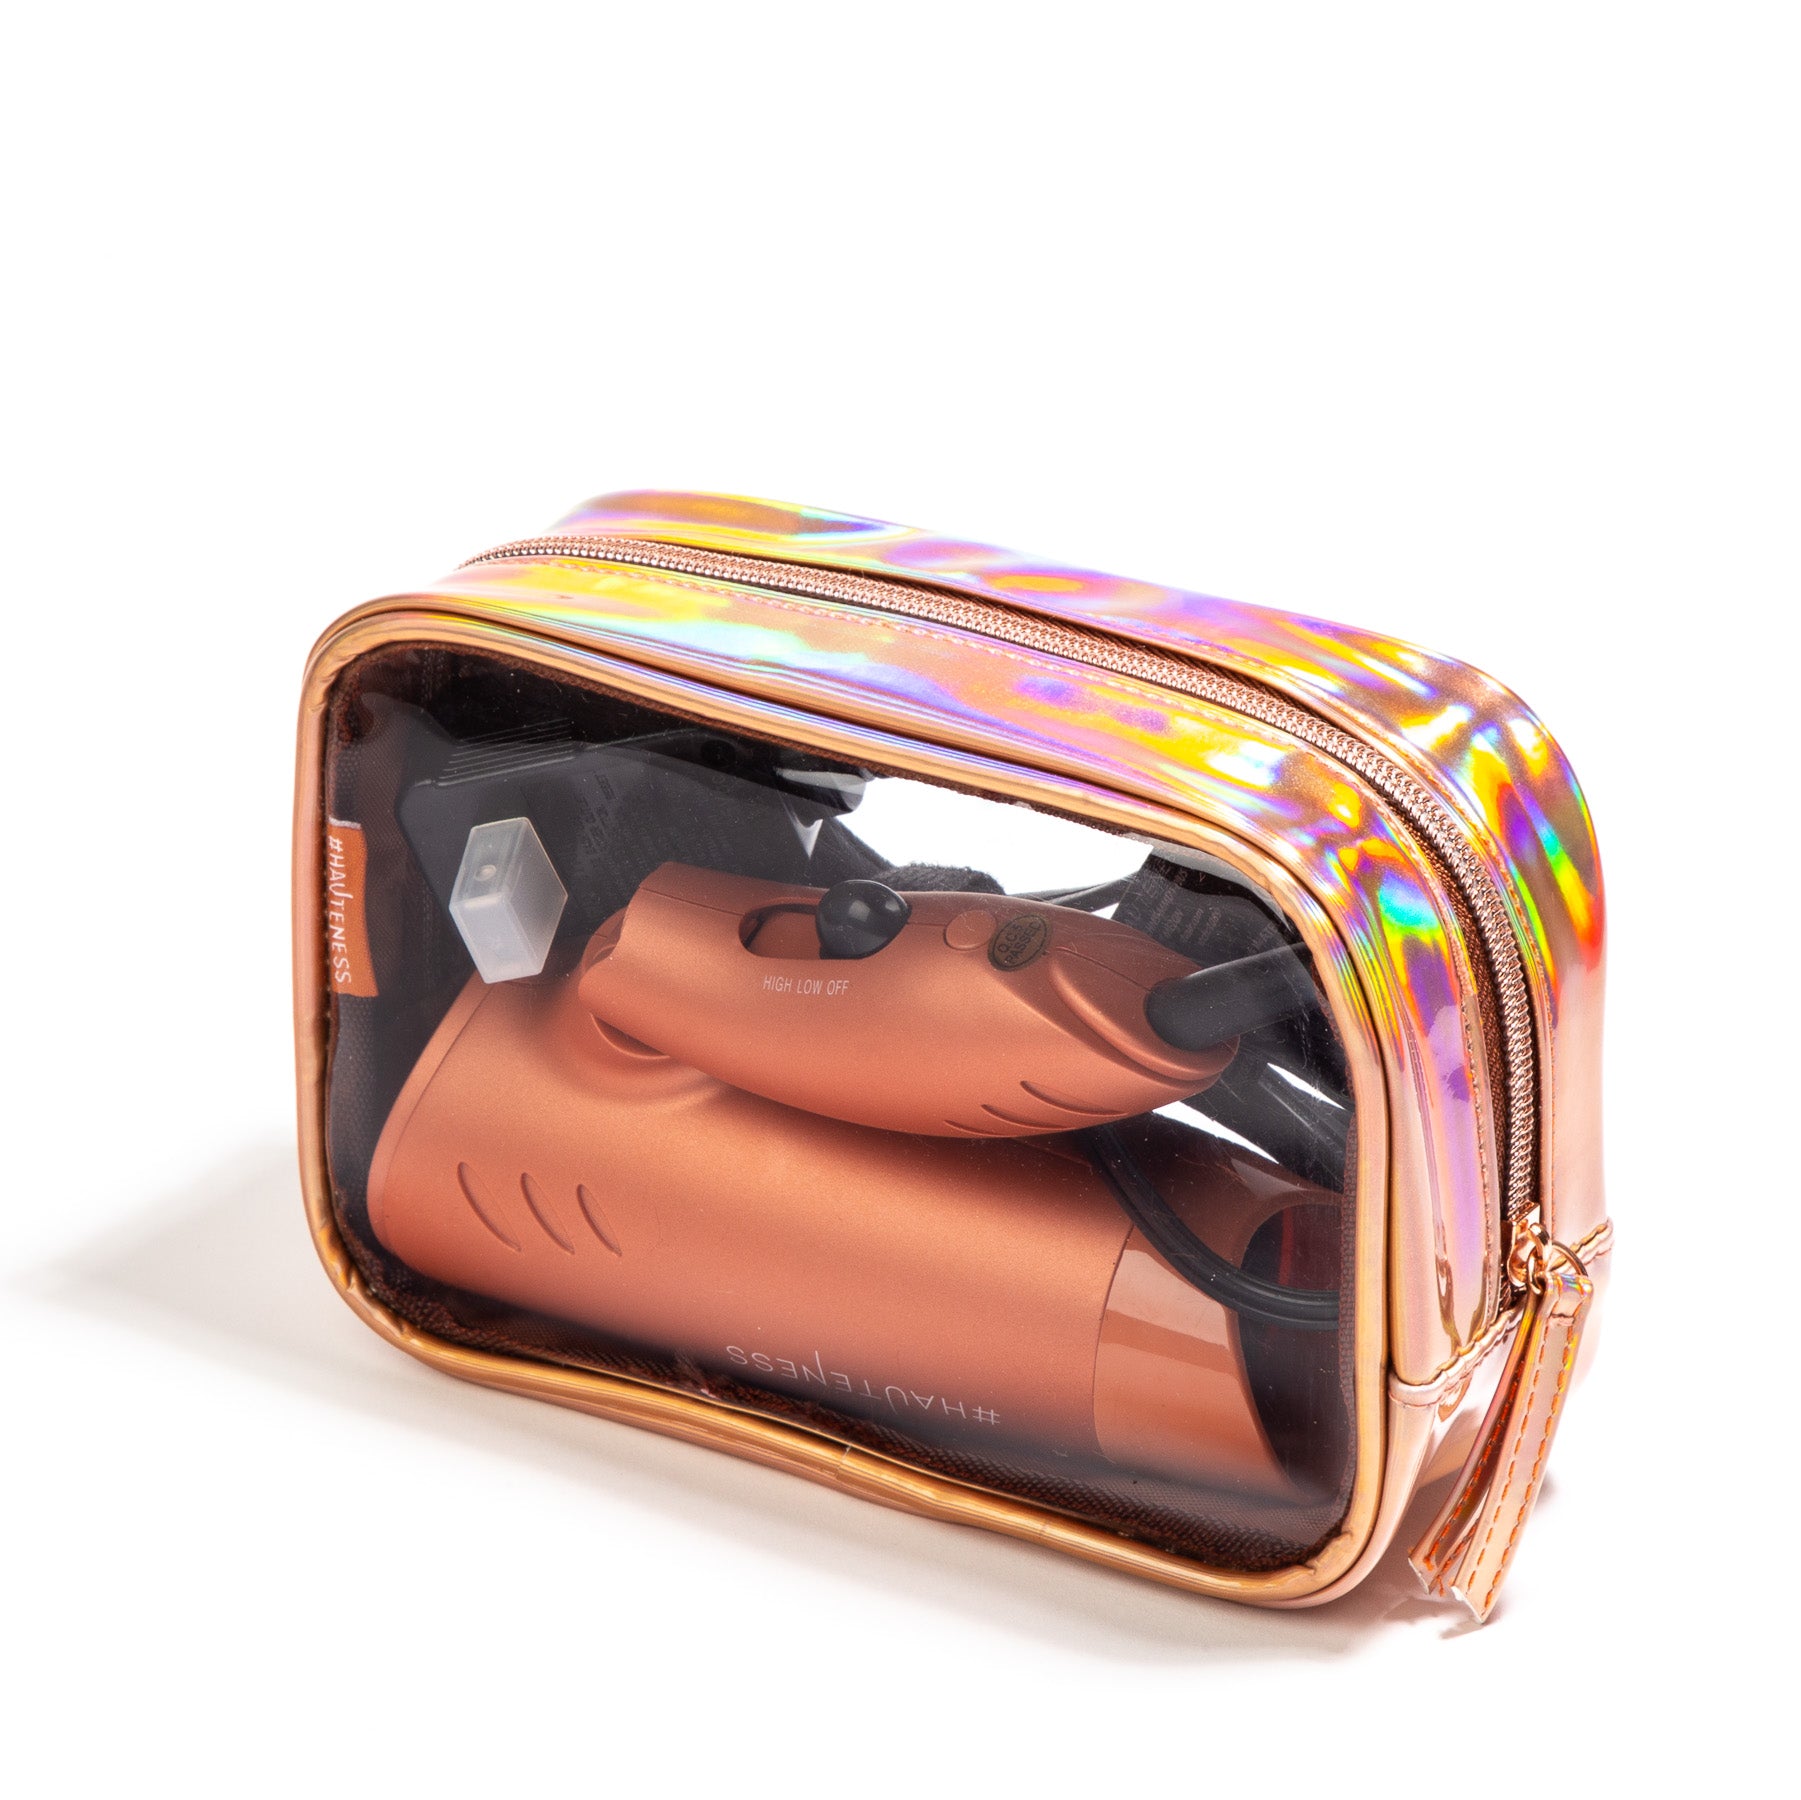 Mighty Mini Dryer (with Travel Bag Included) - Copper